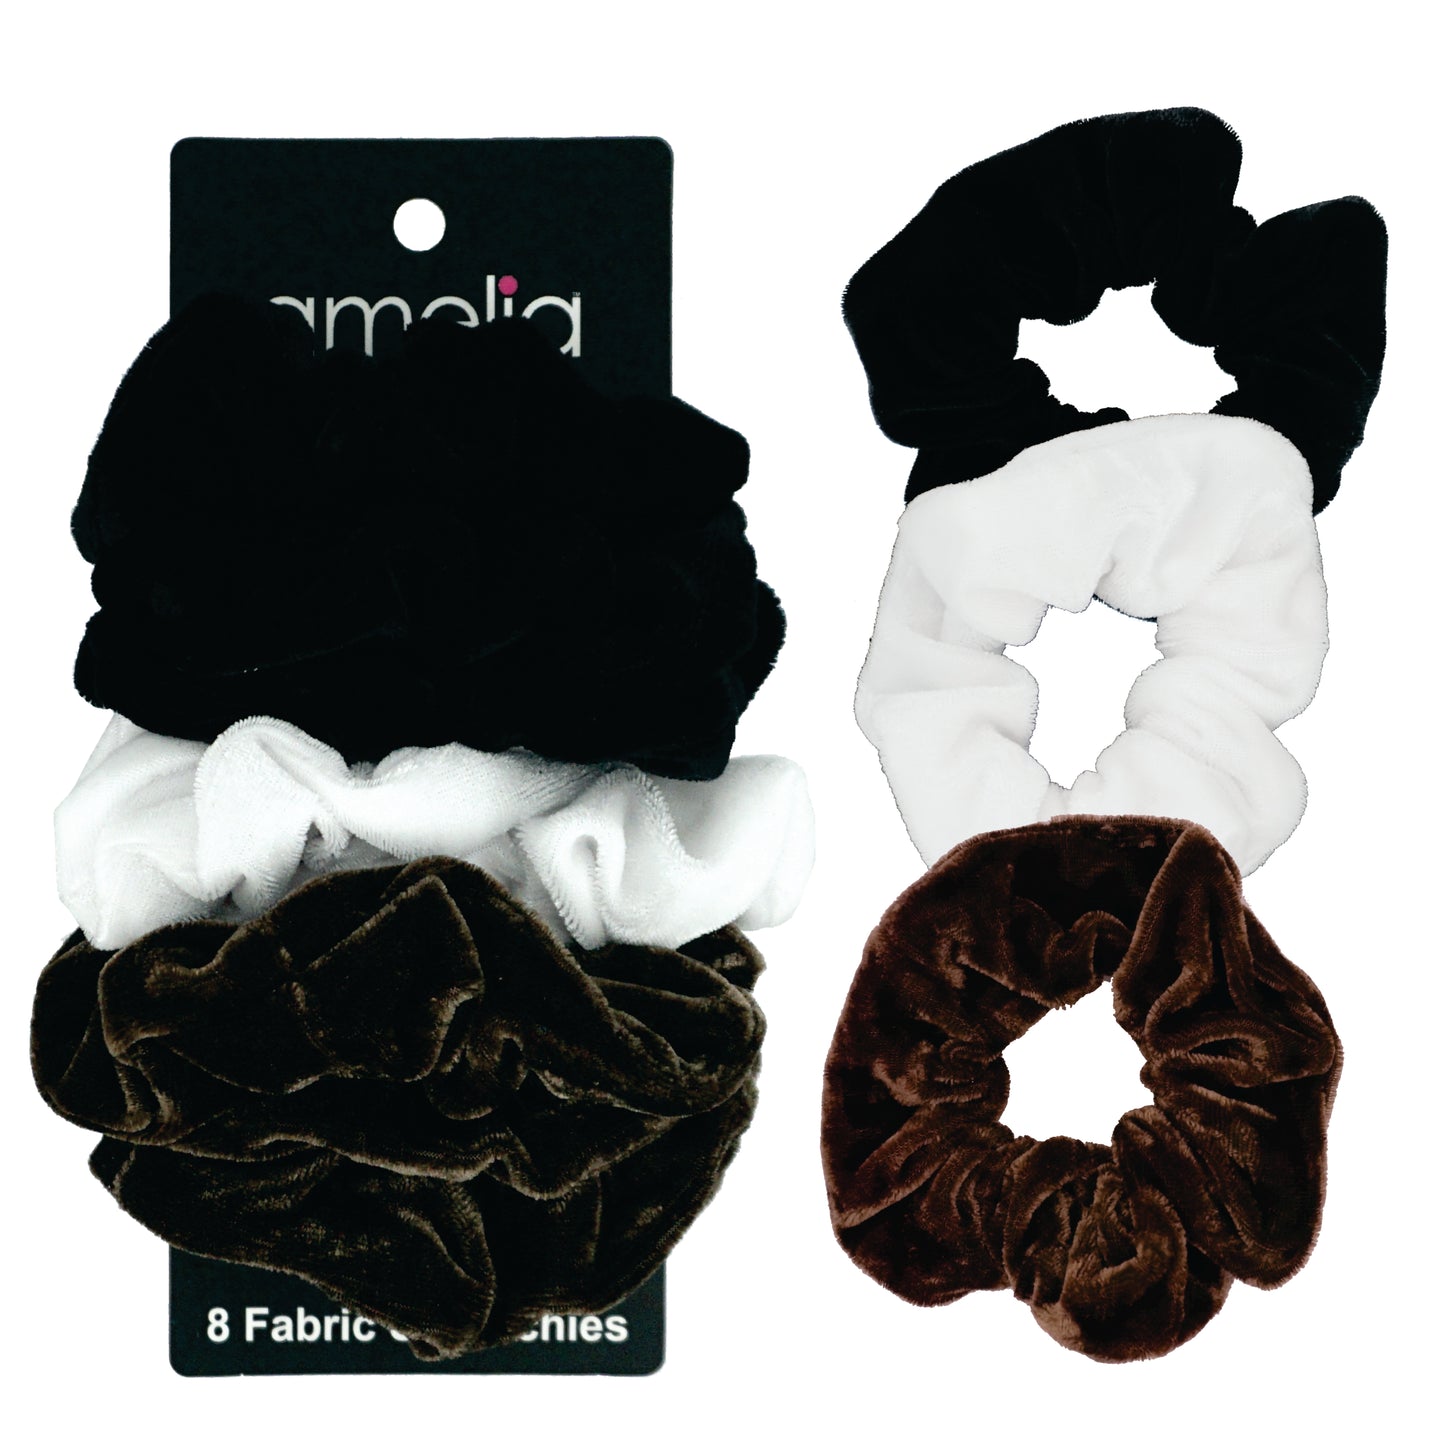 Amelia Beauty Products, Black, White and Brown Velvet Velvet Scrunchies, 3.5in Diameter, Gentle on Hair, Strong Hold, No Snag, No Dents or Creases. 8 Pack